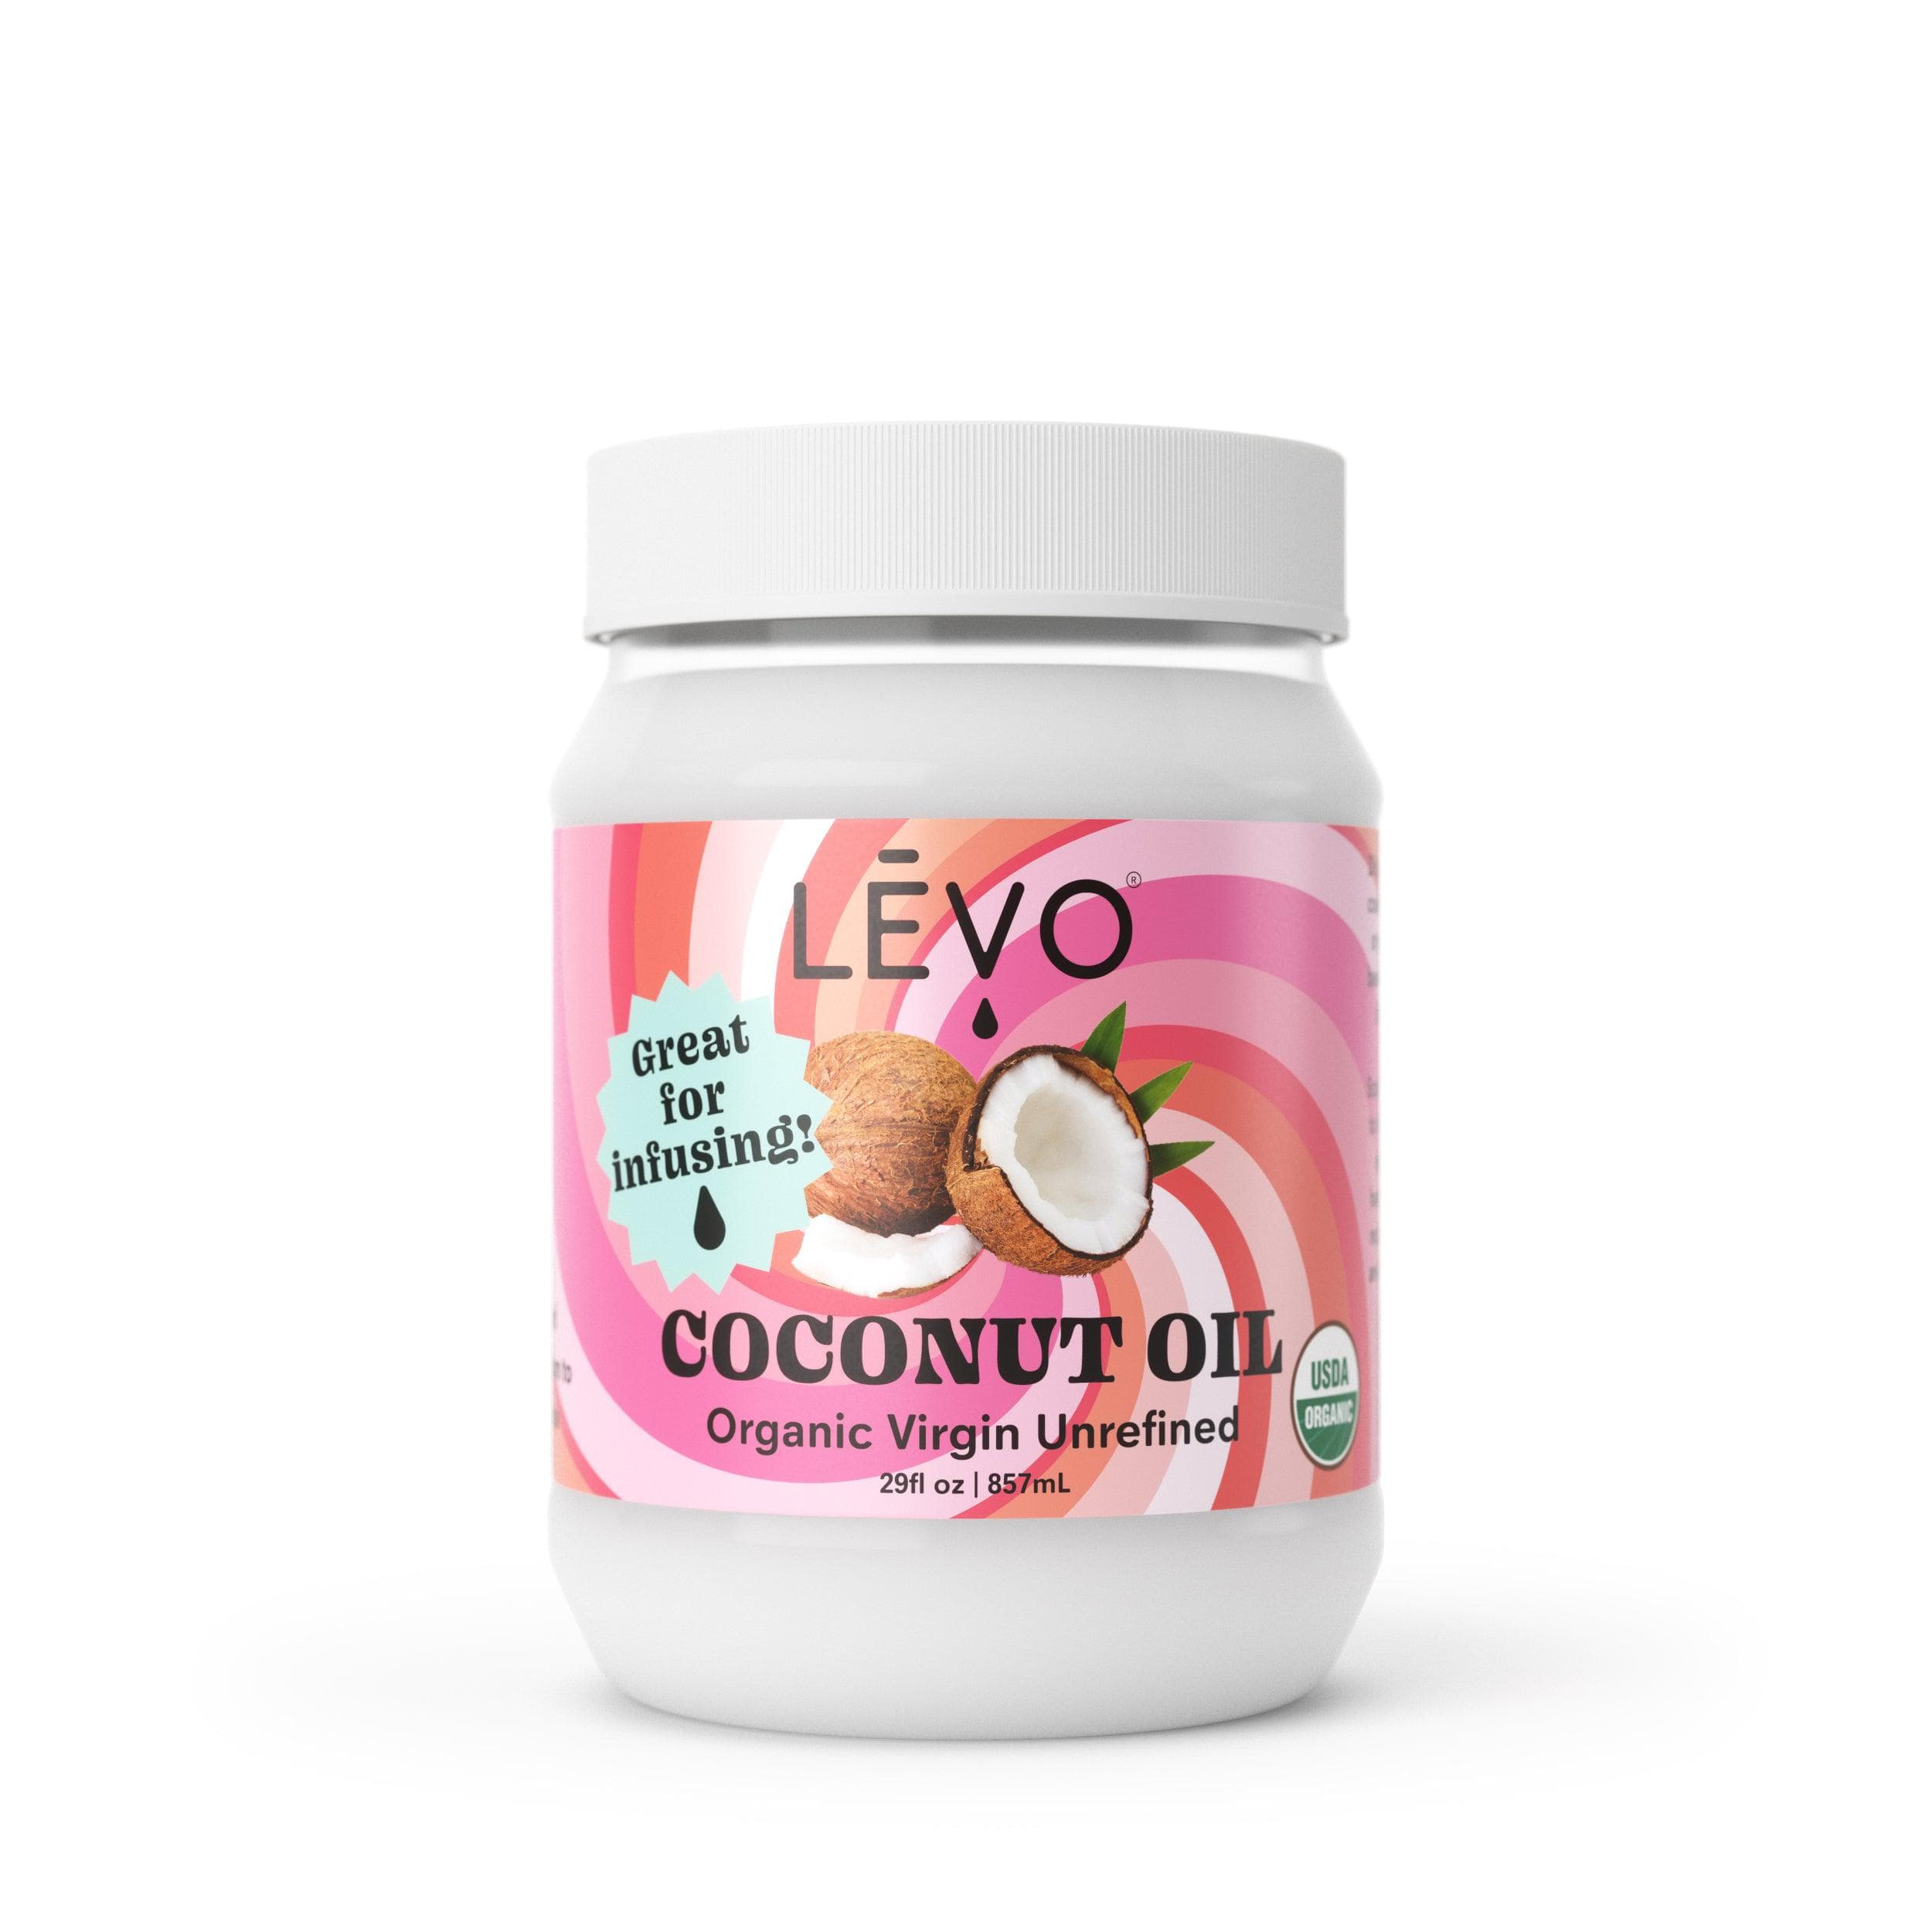 LEVO Coconut Oil is Organic, virgin, and unrefined. It's great for infusing and has a nice coconut taste. Certified Organic for all your healthy infusions with LEVO II. The 29 oz jar will fill almost 2 reservoirs full. Cold-pressed and pure, LĒVO Organic Virgin Coconut Oil is a nutritious choice for your culinary creations.